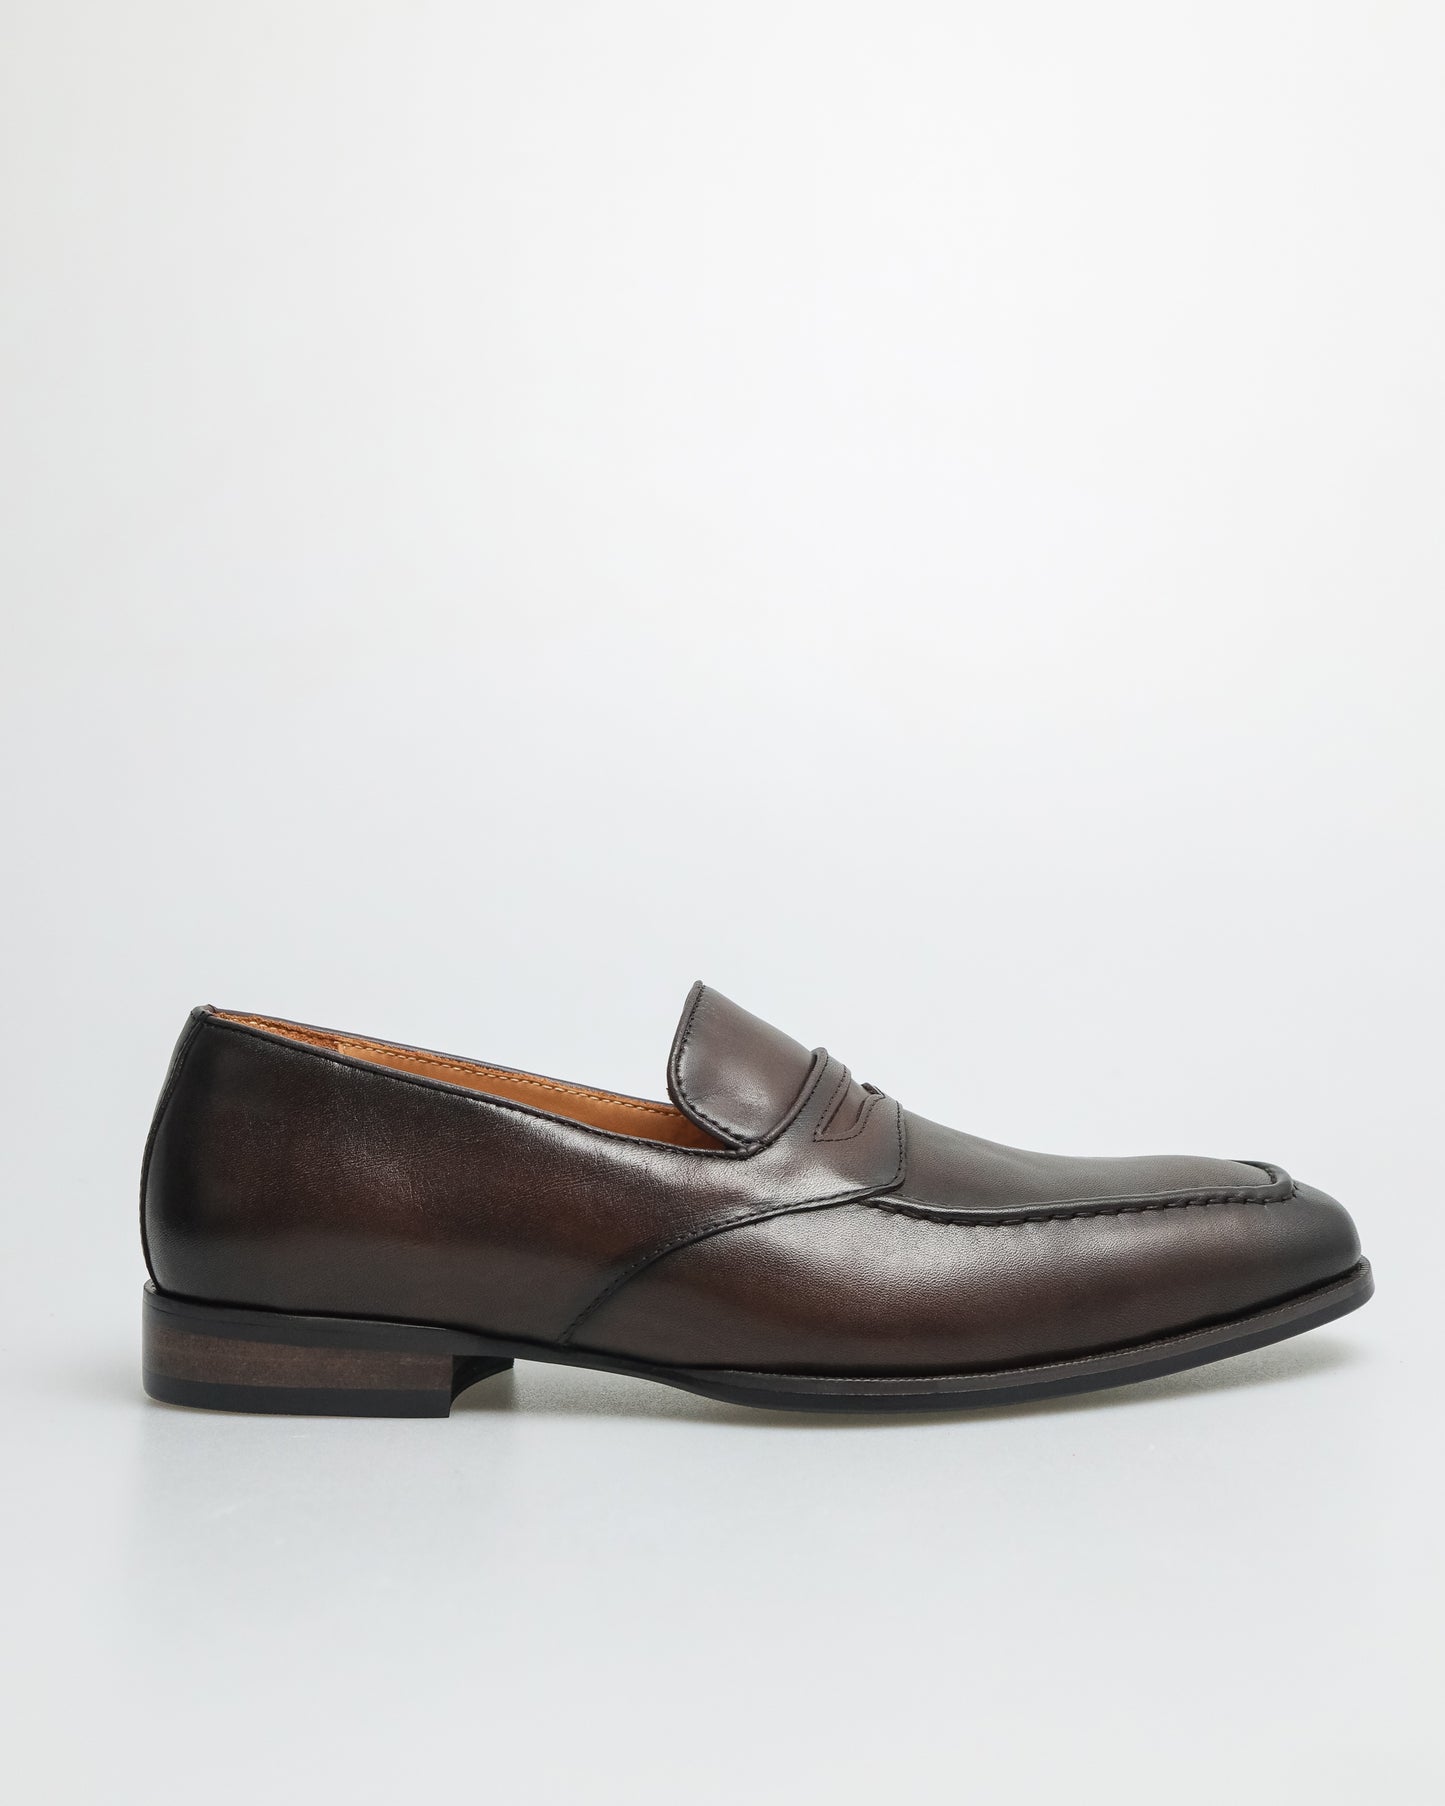 Tomaz F354 Men's Penny Loafers (Coffee)